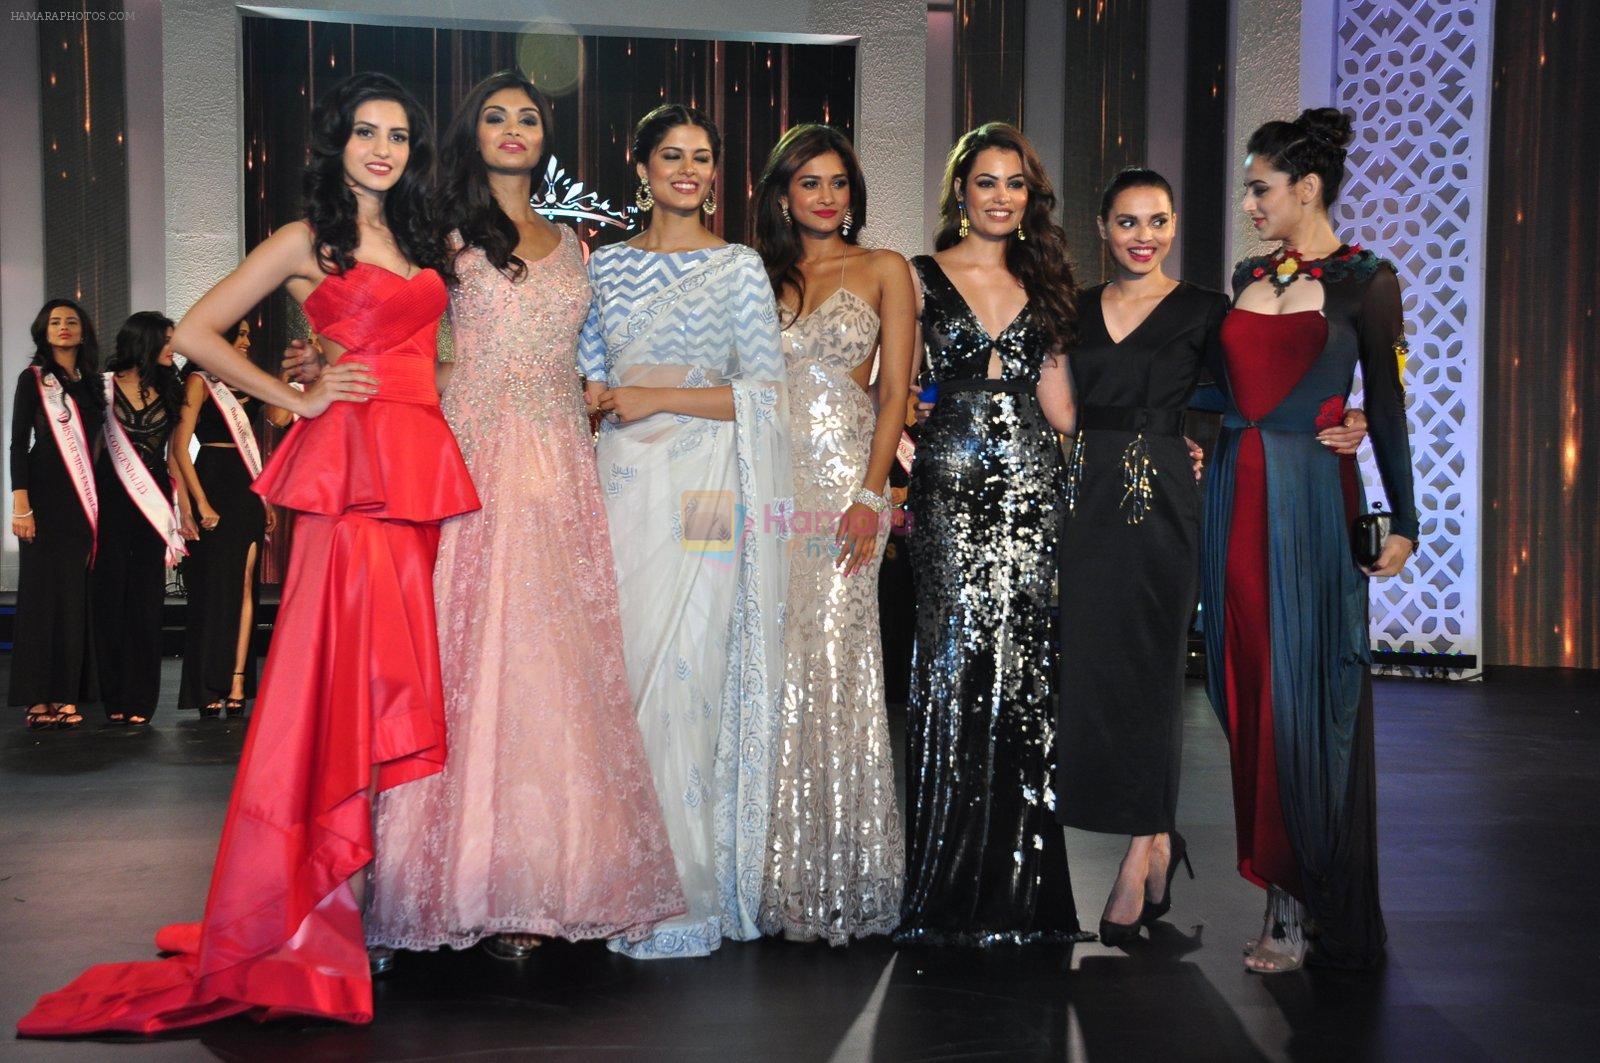 at Femina Miss India Contest on 22nd March 2016